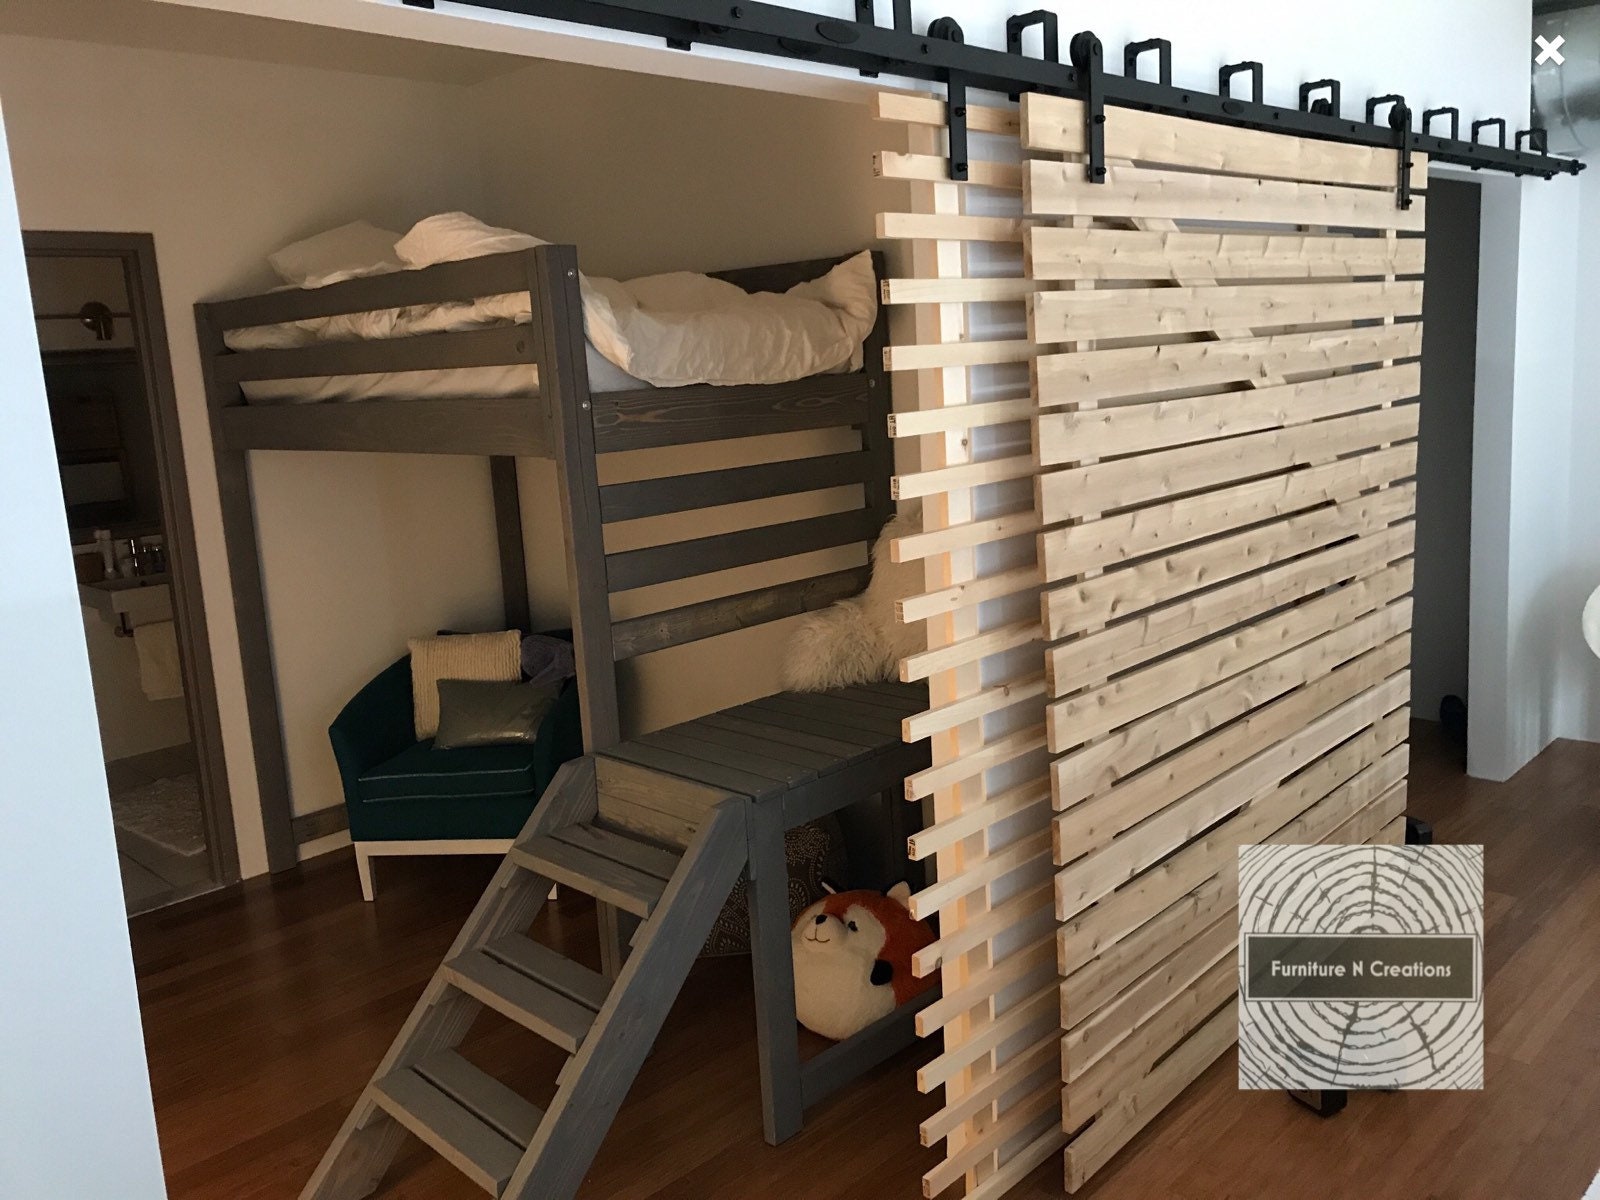 Twin Rustic Chic Loft Bed With Stairs, Dorm Room Bunk Bed Ladders